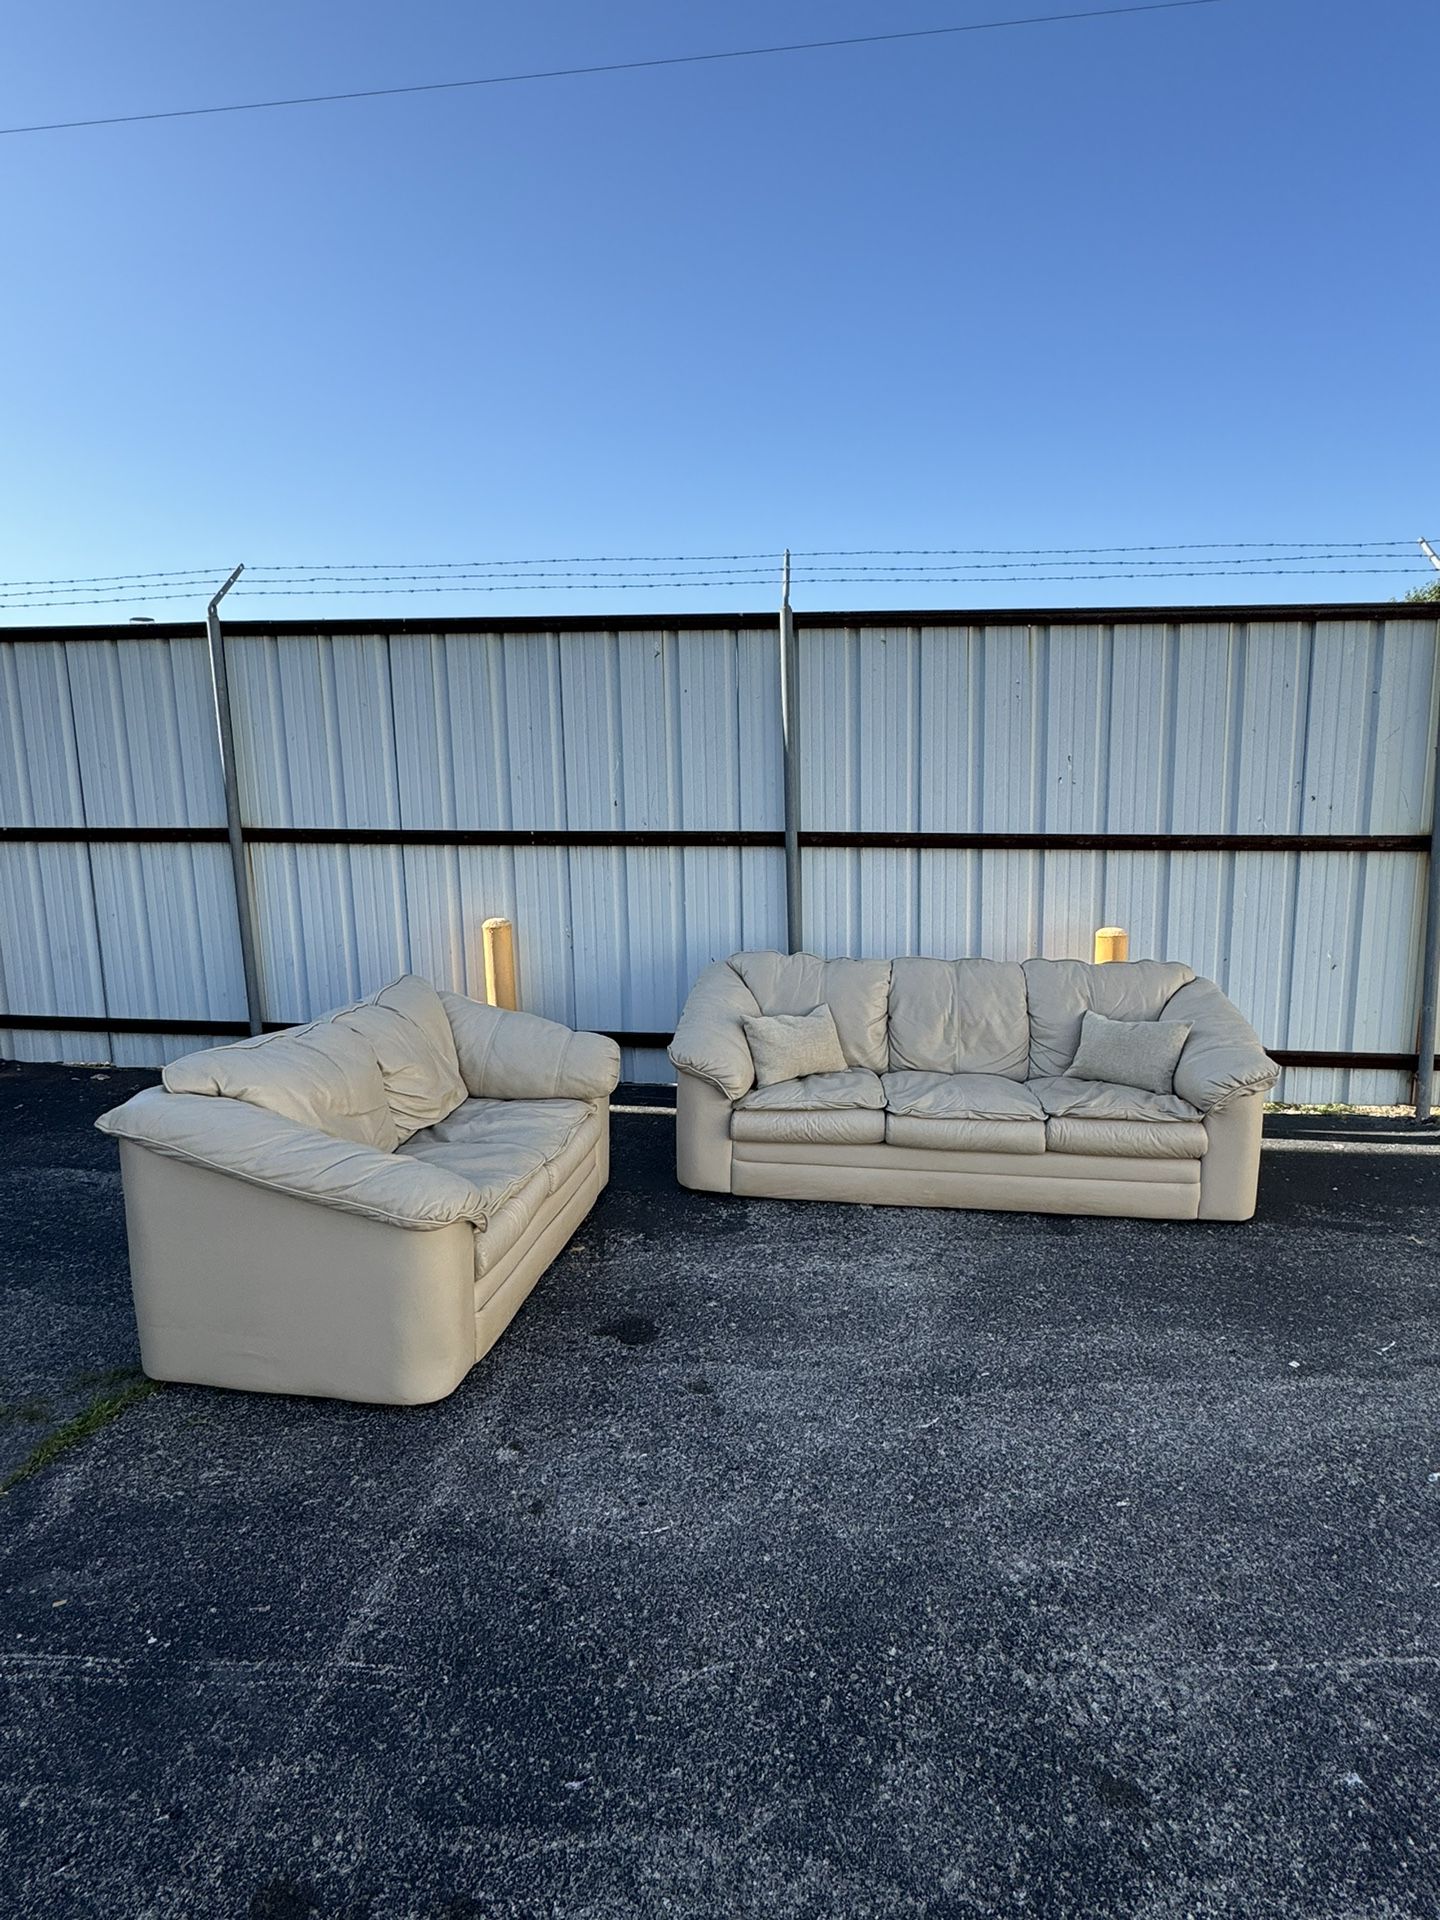 FREE DELIVERY - Cream/Tan Leather Couch and Loveseat 